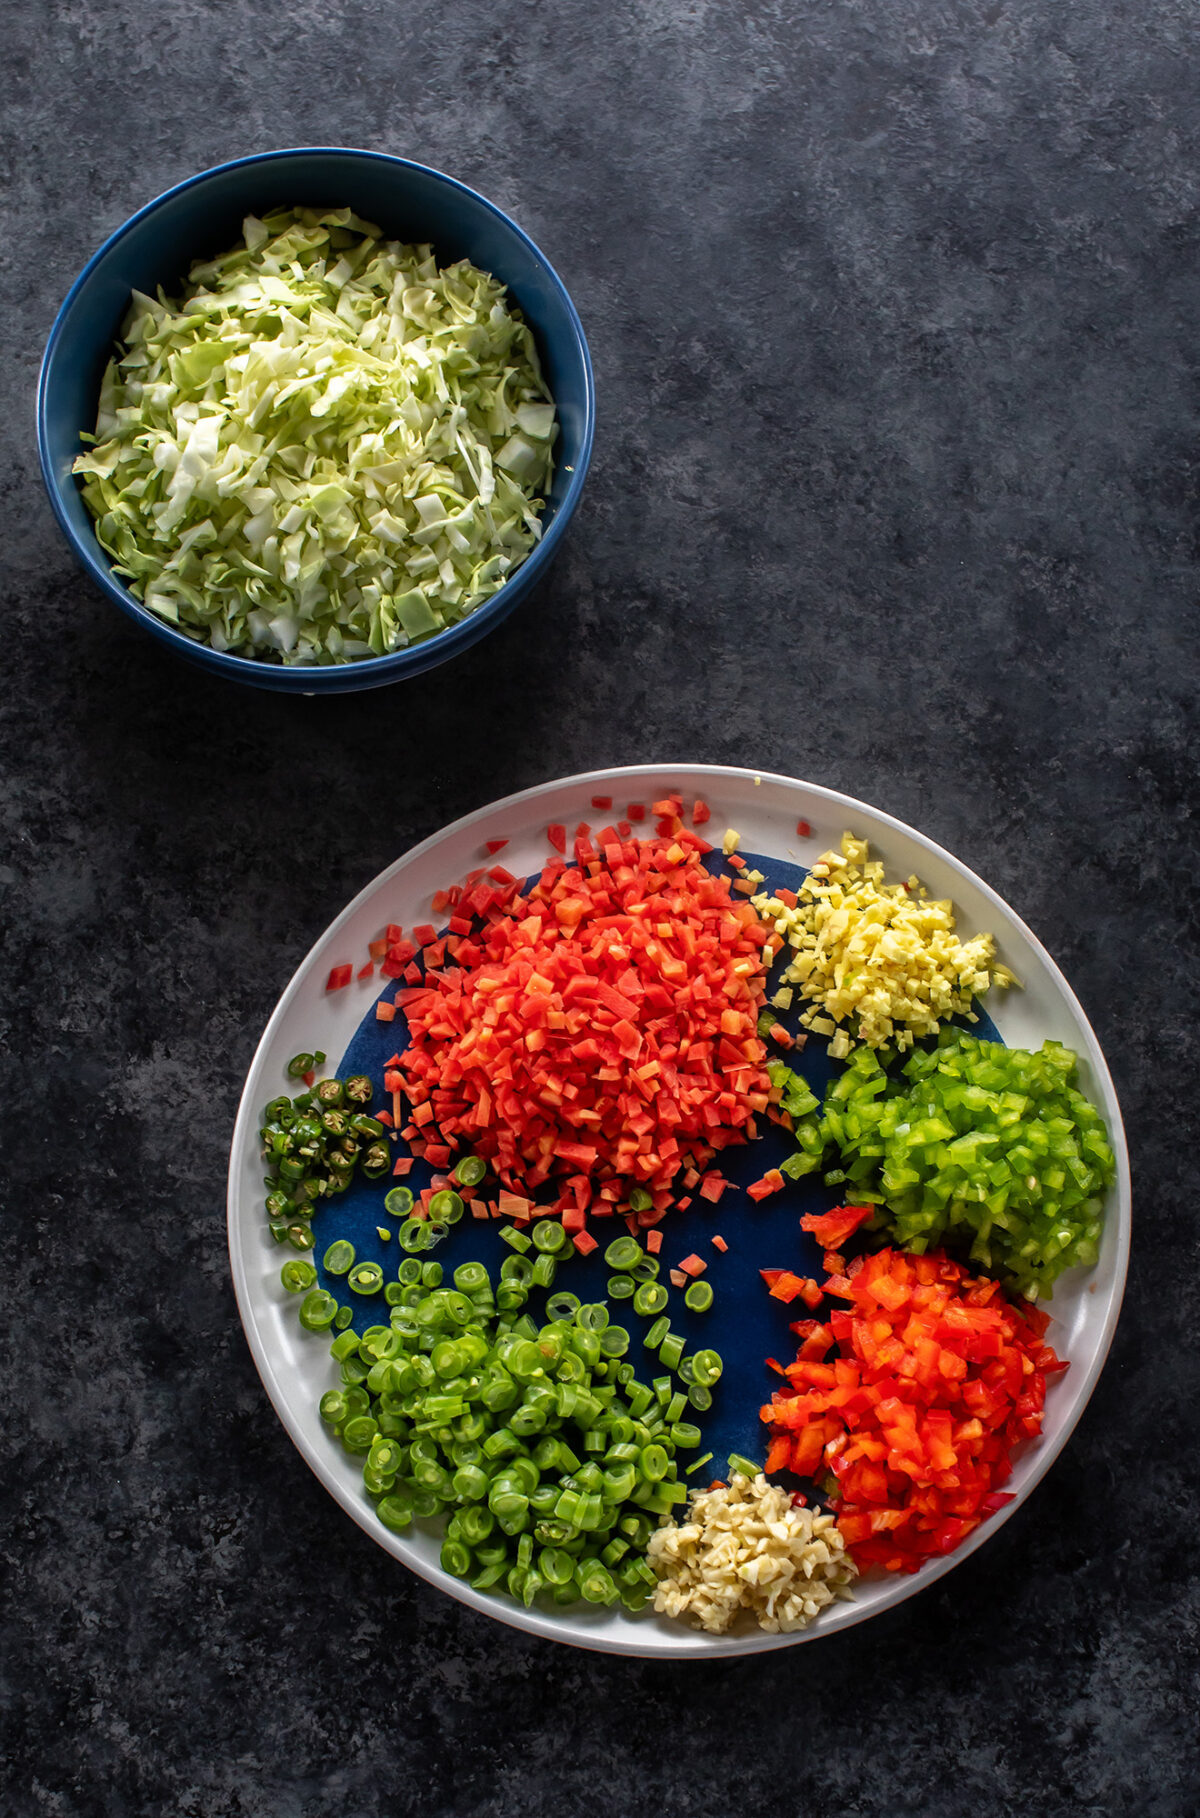 chopped vegetables arranged in a plate